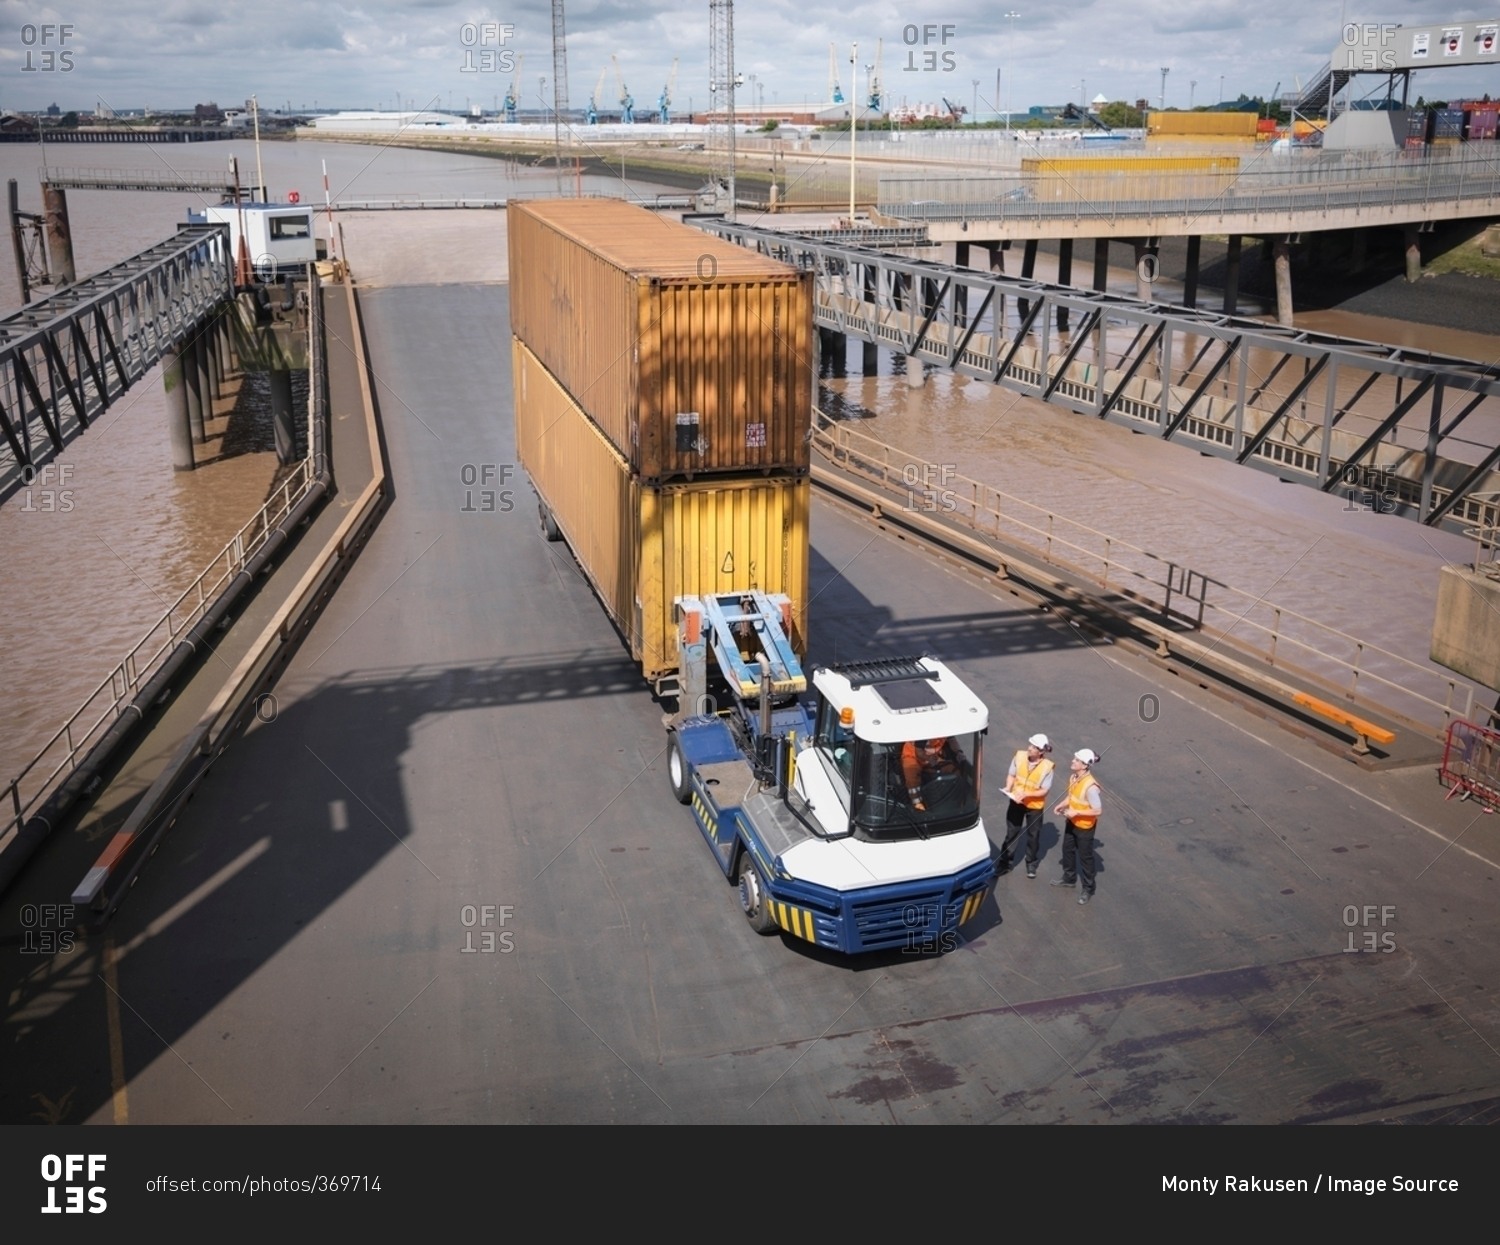 Elevated view of shipping container and truck on ramp to ship